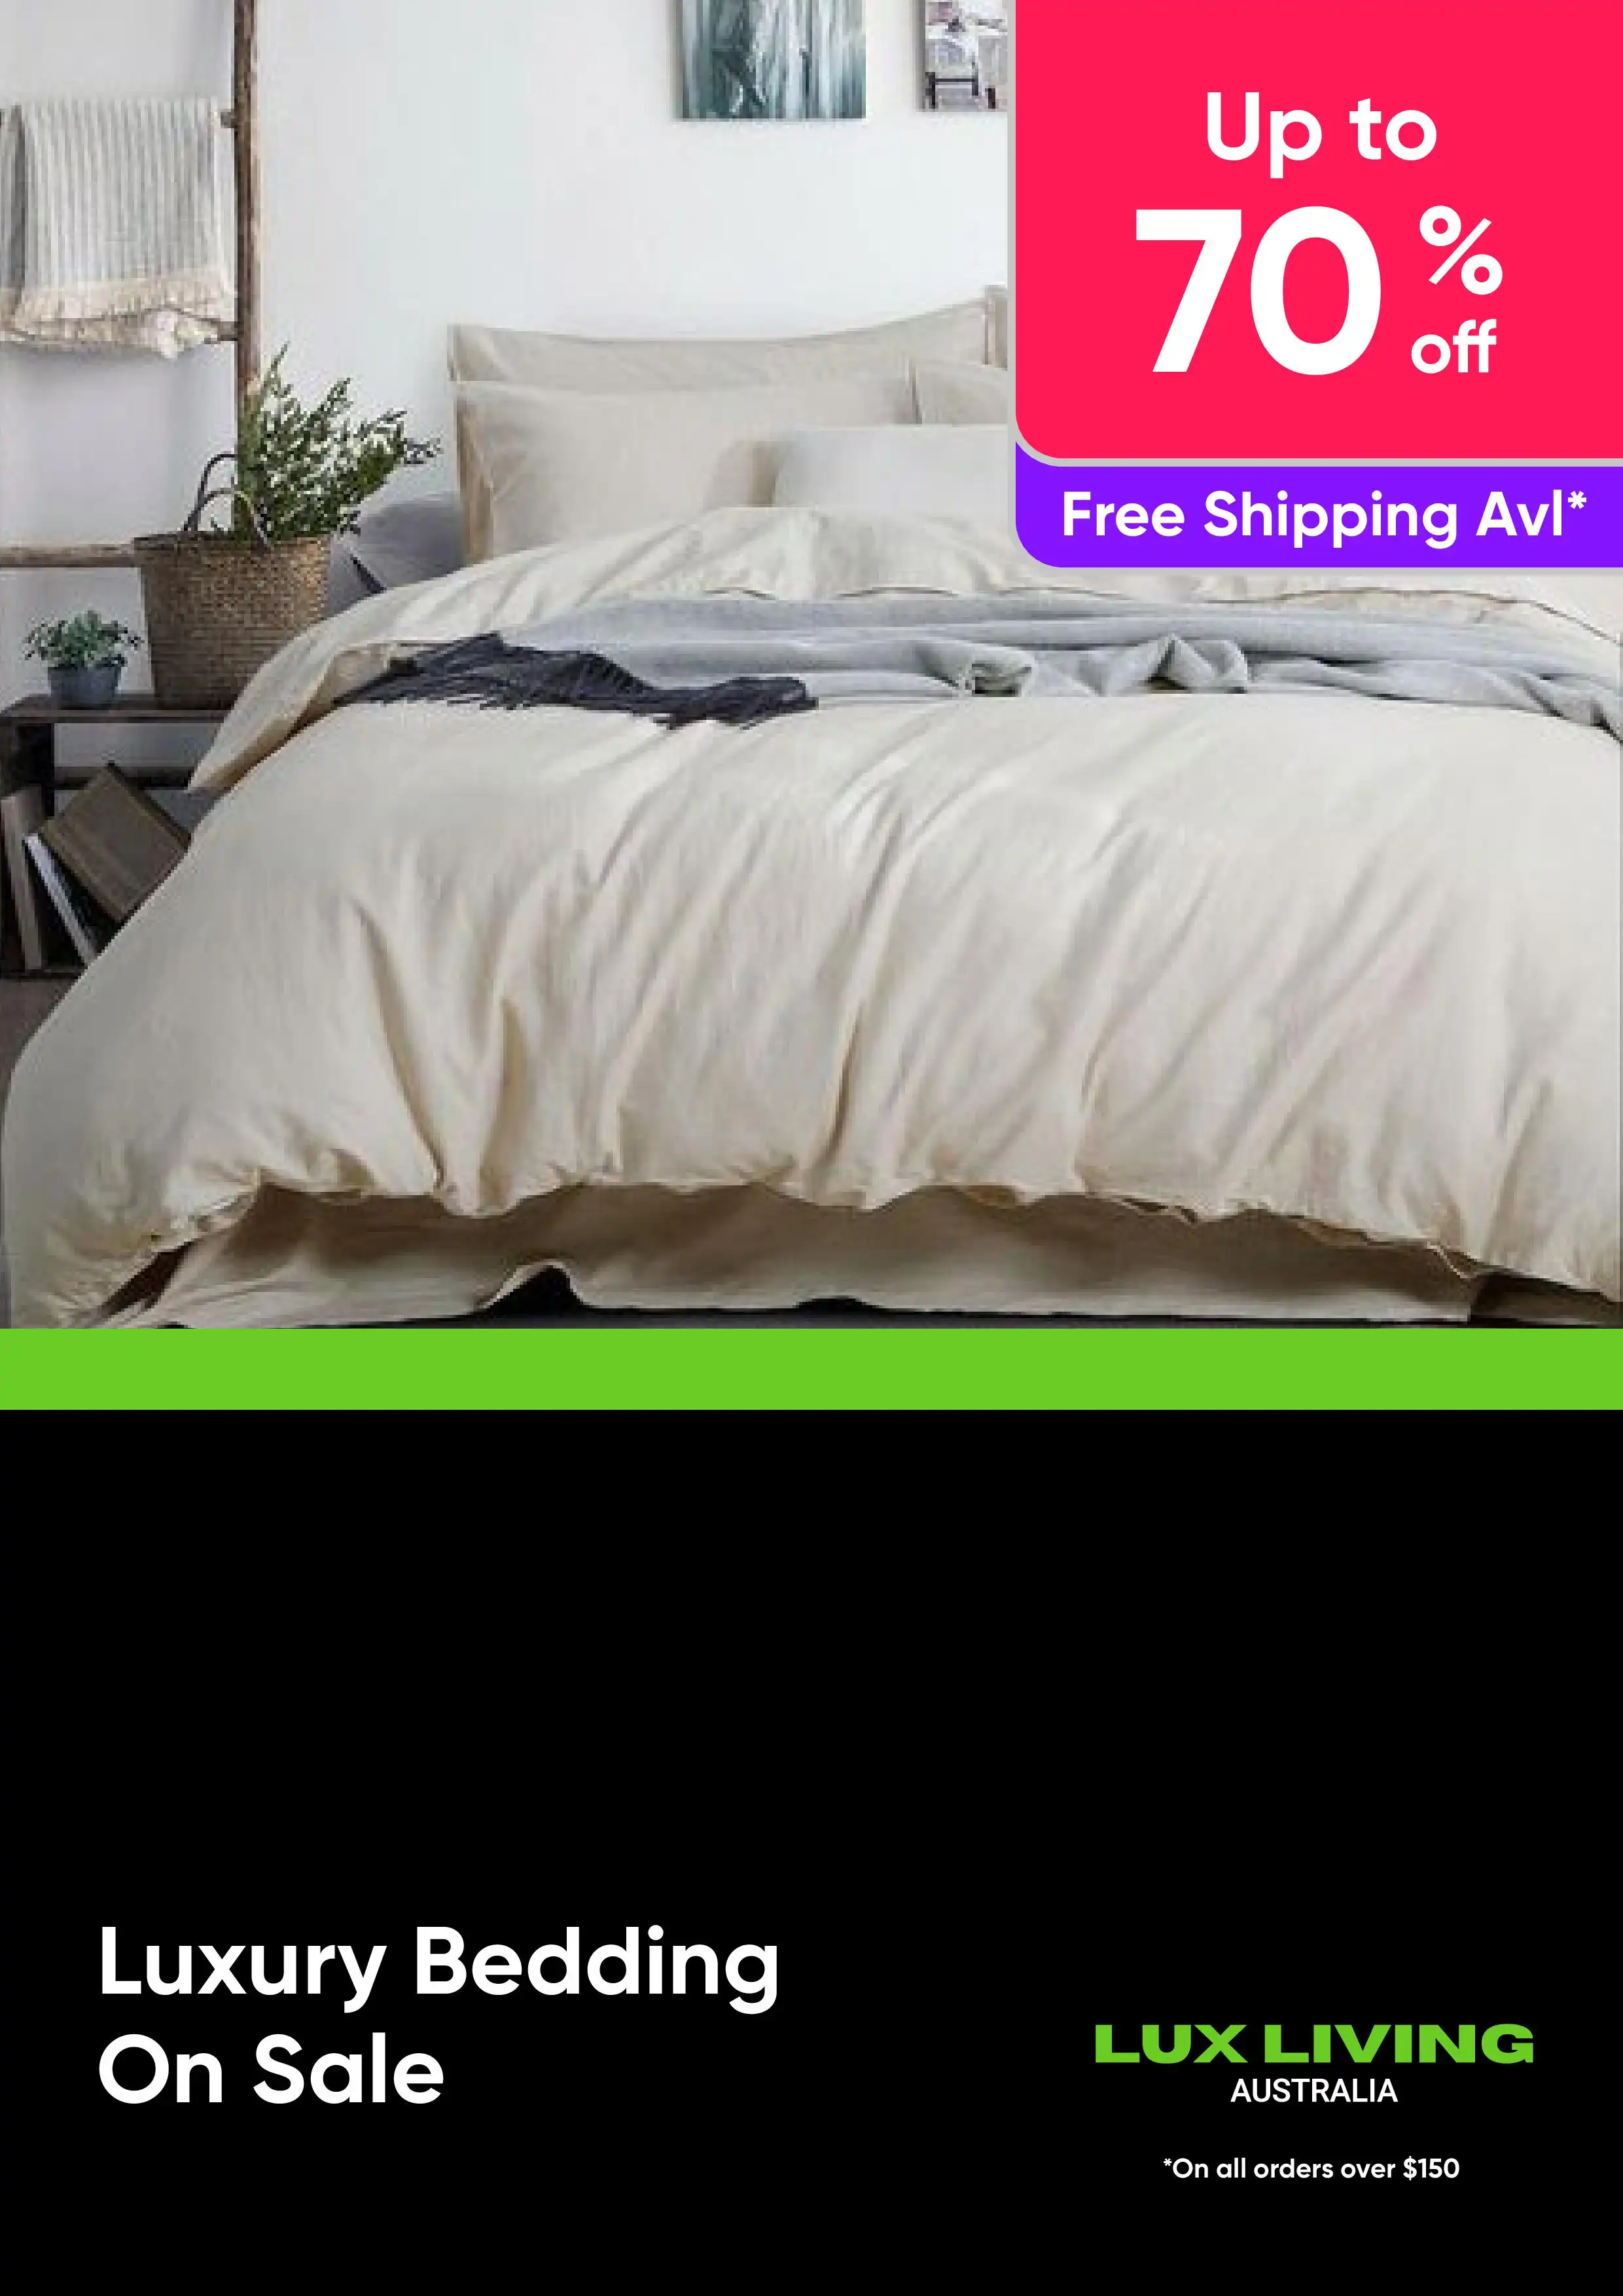 Luxury Bedding On Sale - Doonas, Quilt Cover Sets, Pillow Cases and More - Prima, Ramesses - Up to 70% off